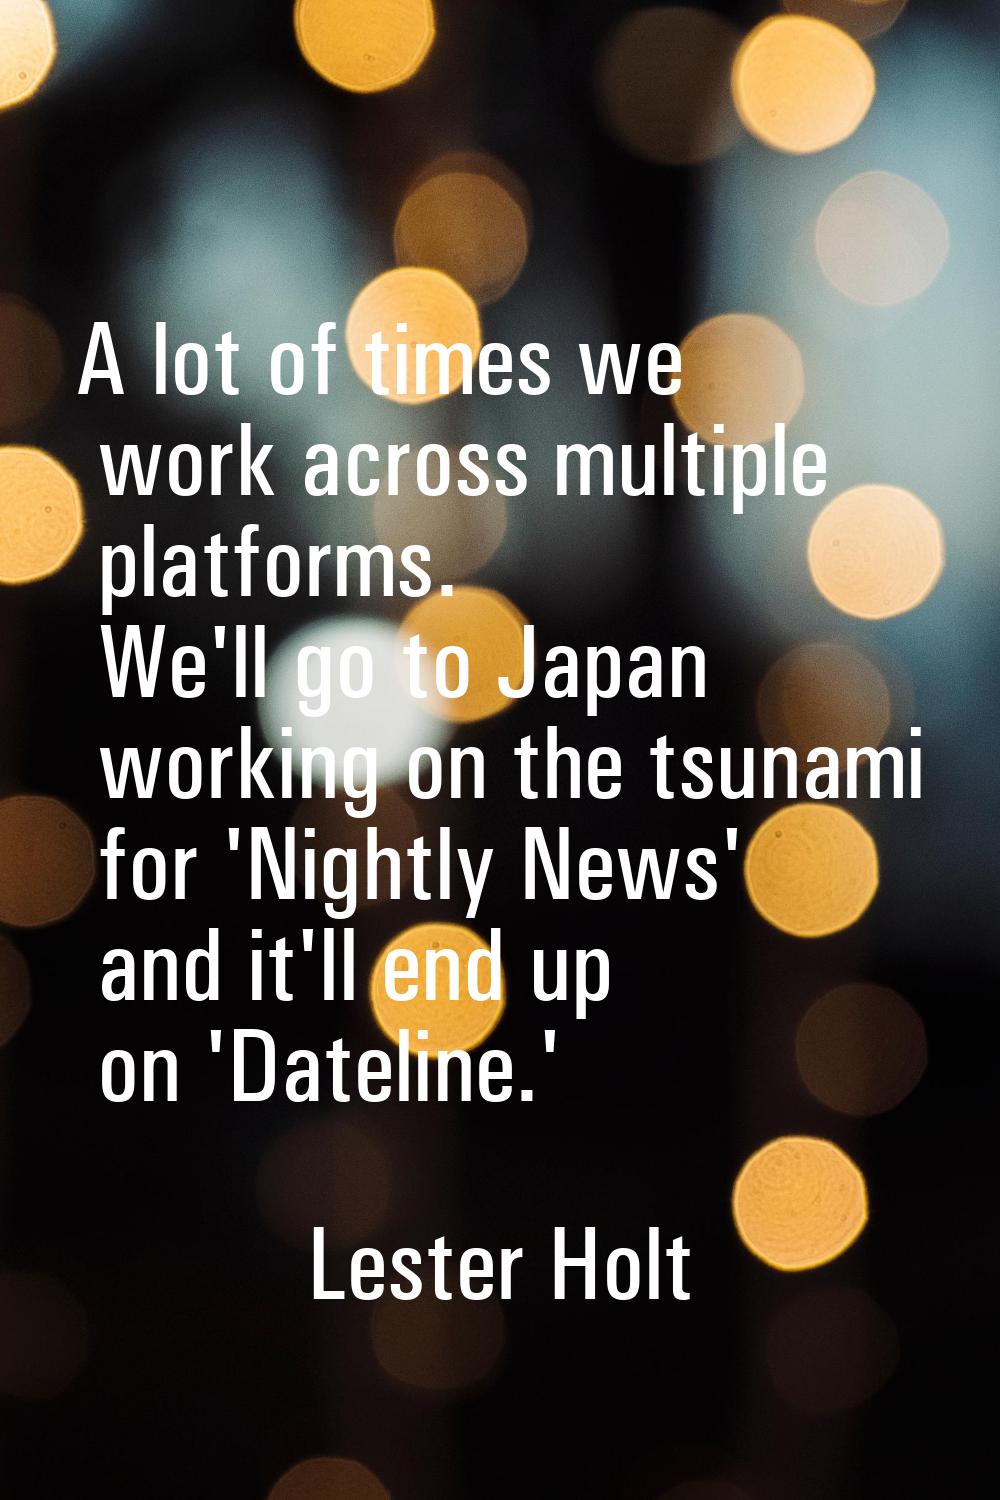 A lot of times we work across multiple platforms. We'll go to Japan working on the tsunami for 'Nig